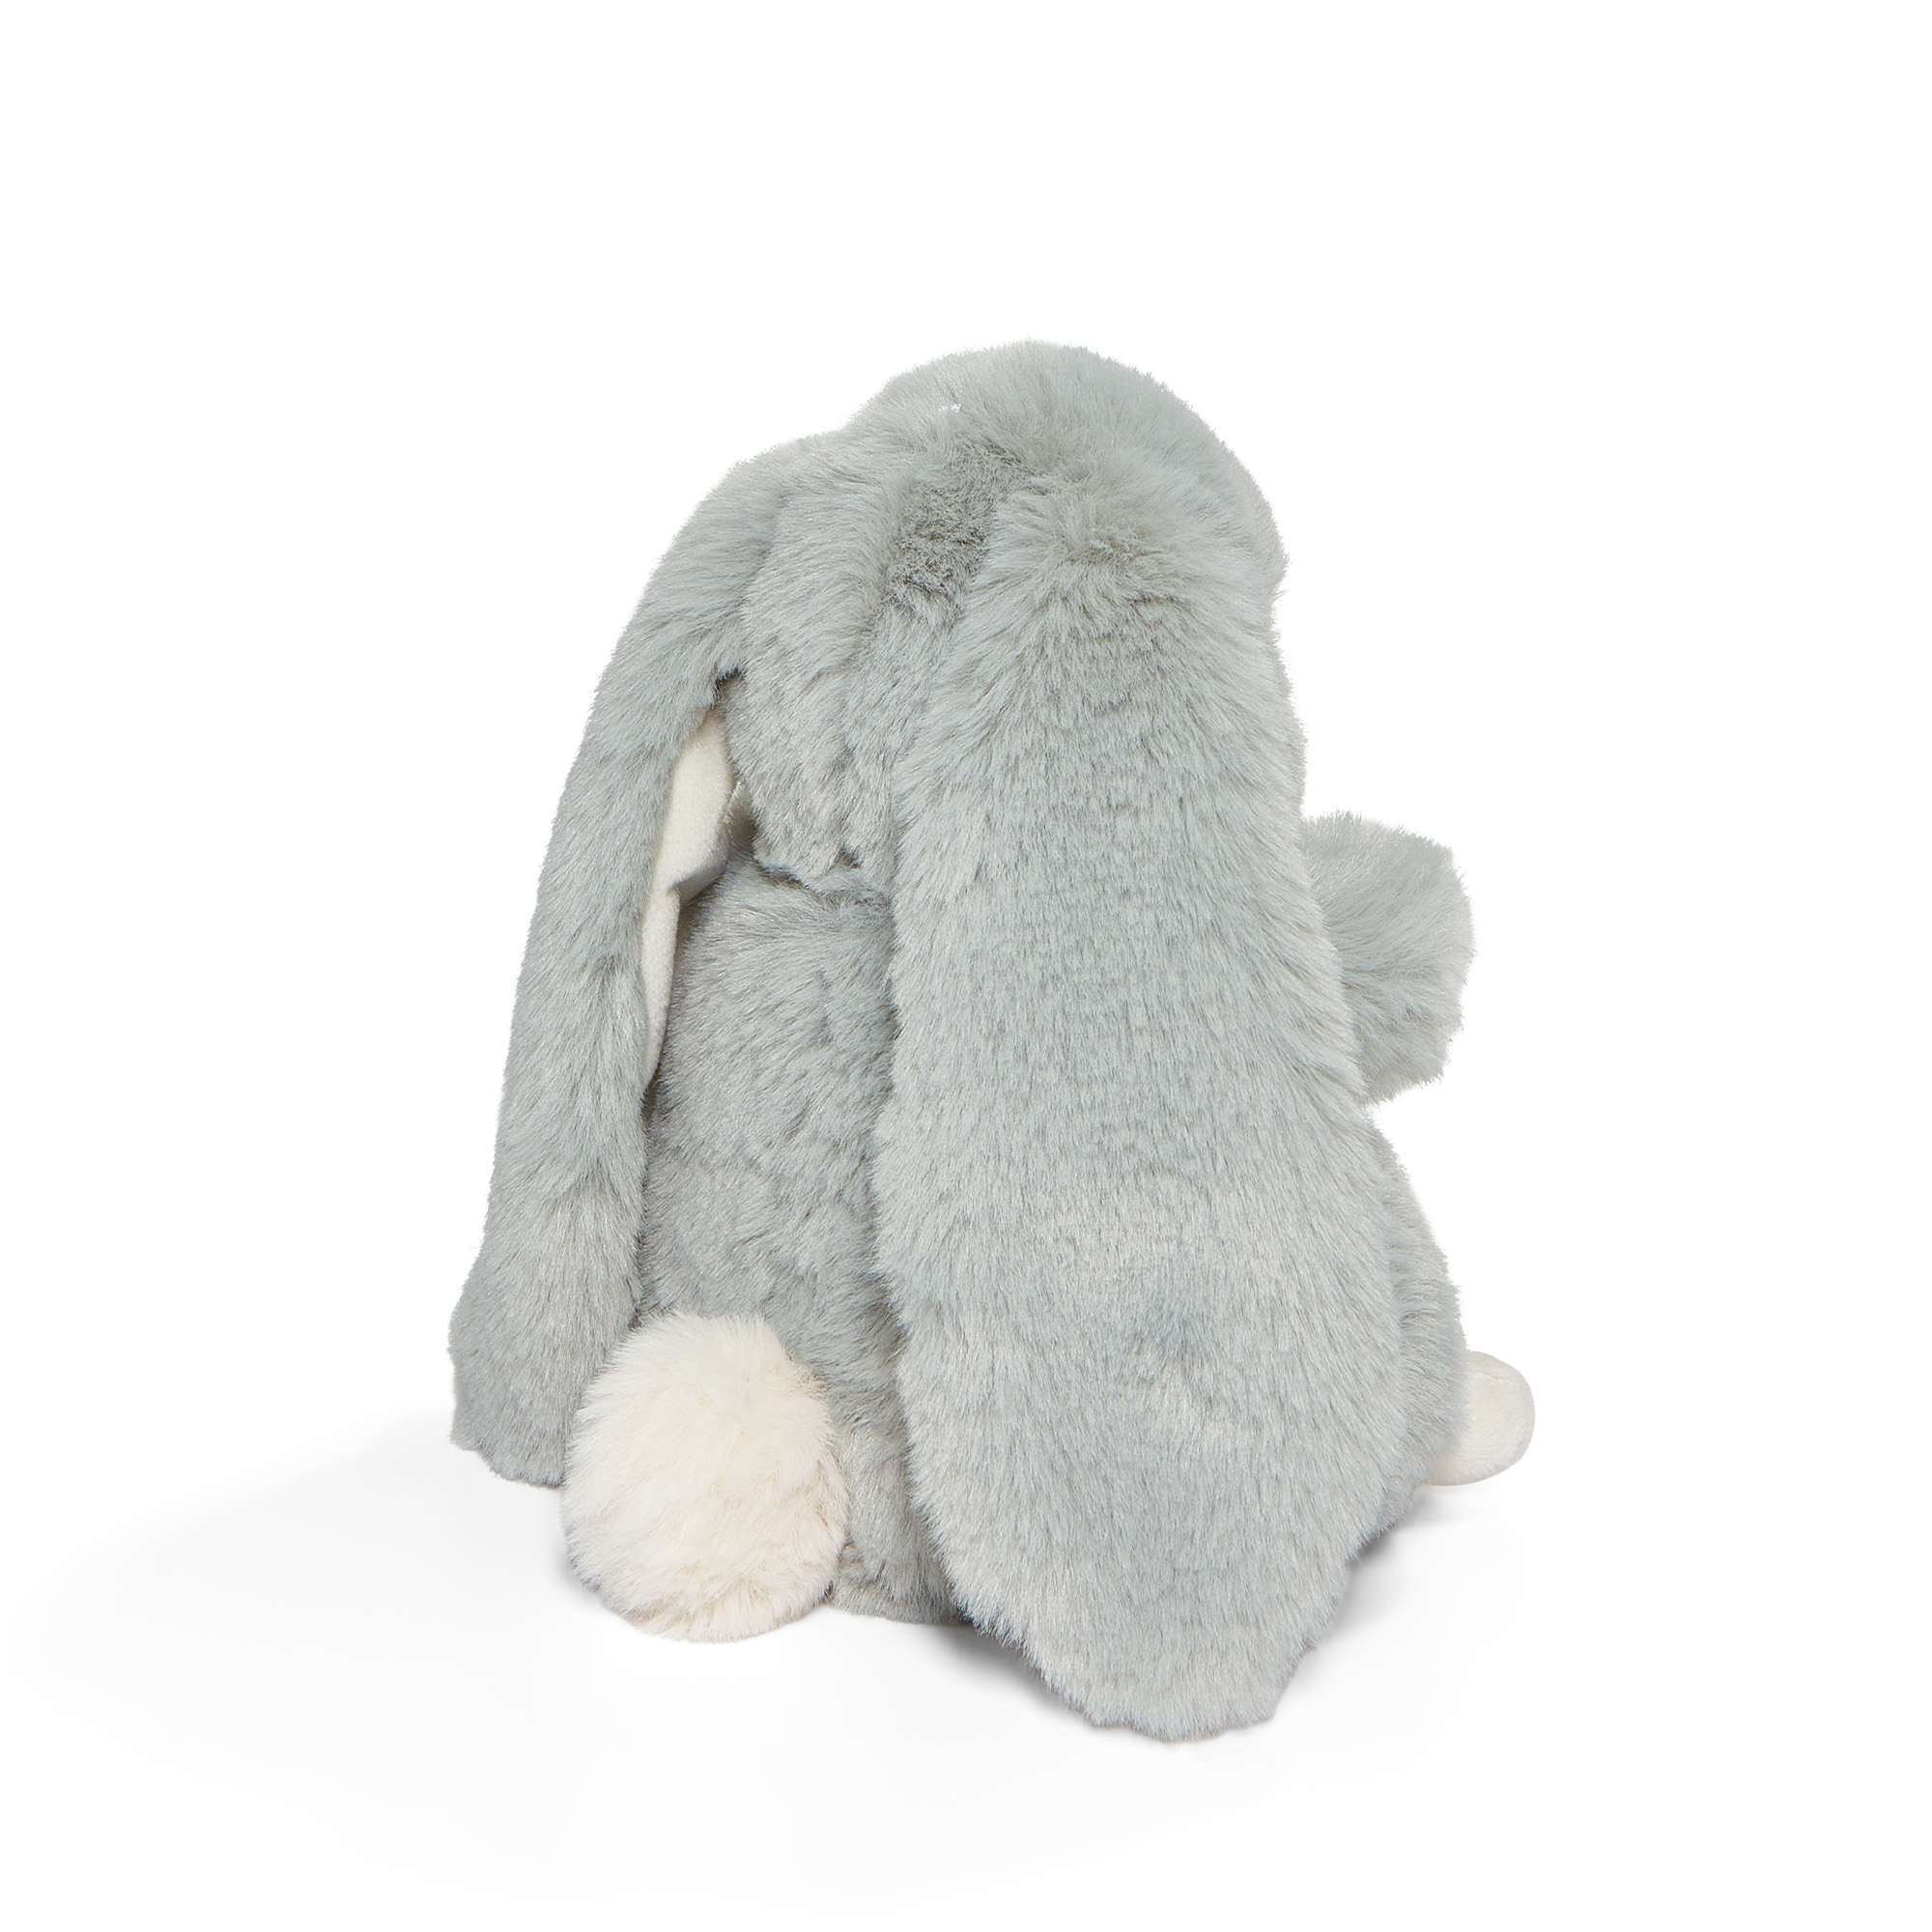 Peluche tiny nibble spa blue bunny 20 cm - Bunnies By The Bay